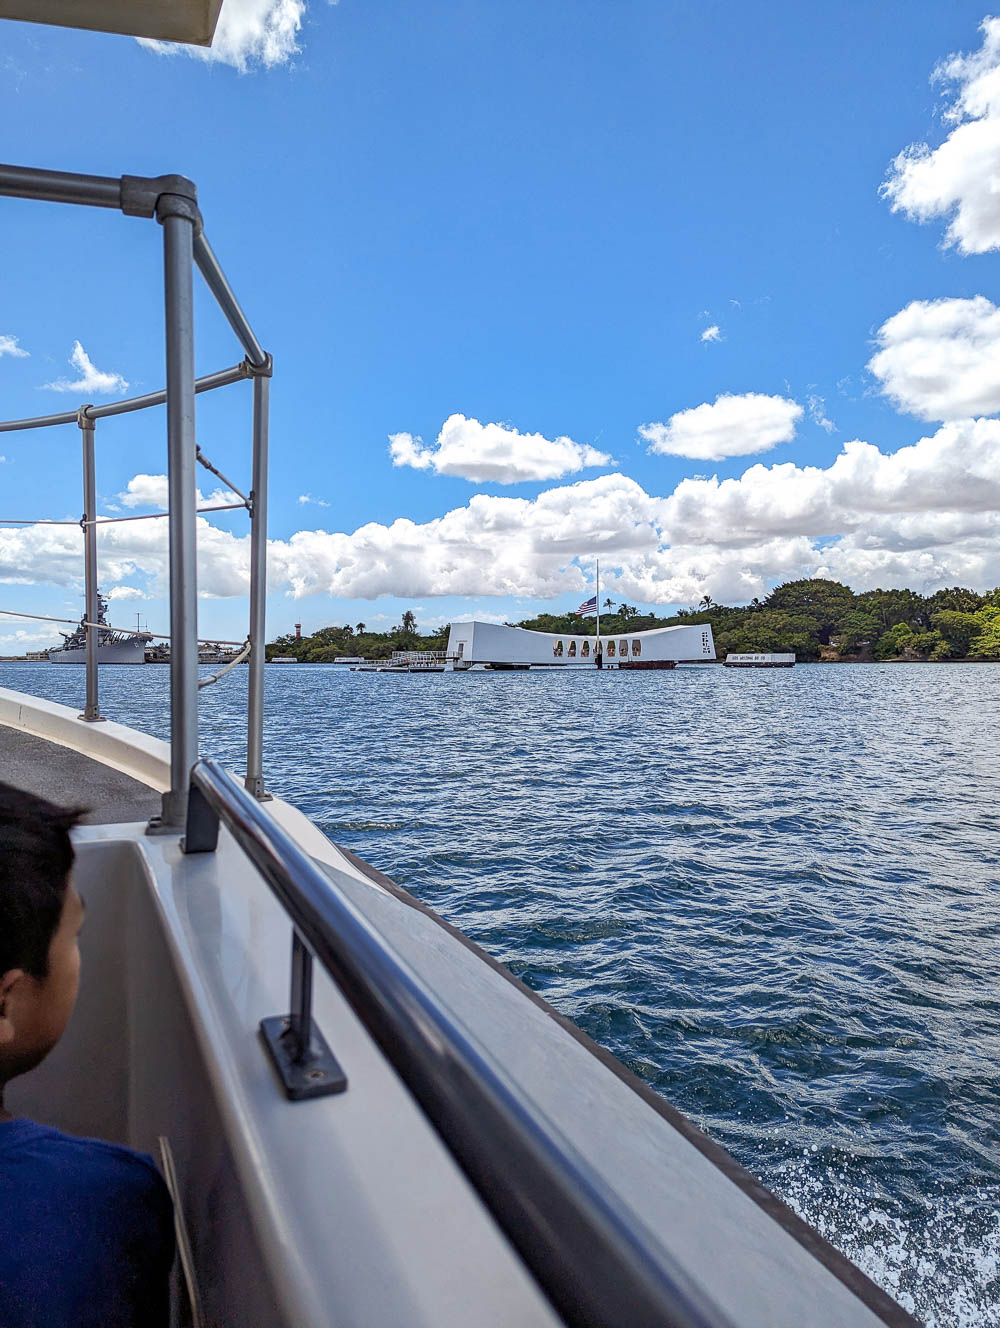 view of the uss arizona memorial from the boat